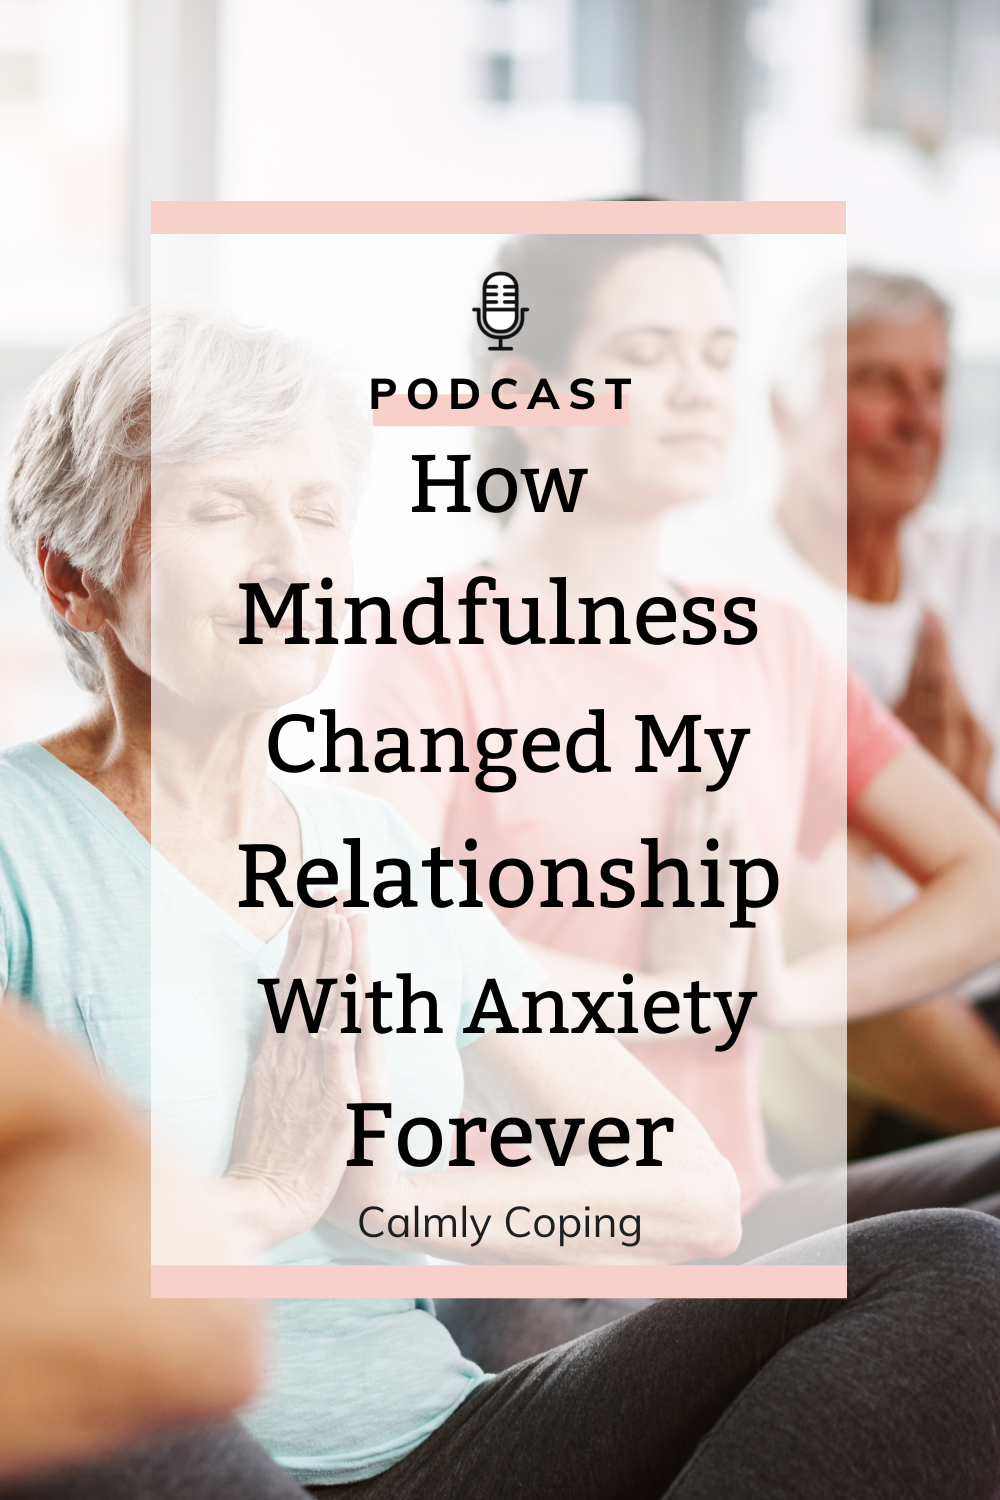 How Mindfulness Changed My Relationship With Anxiety Forever